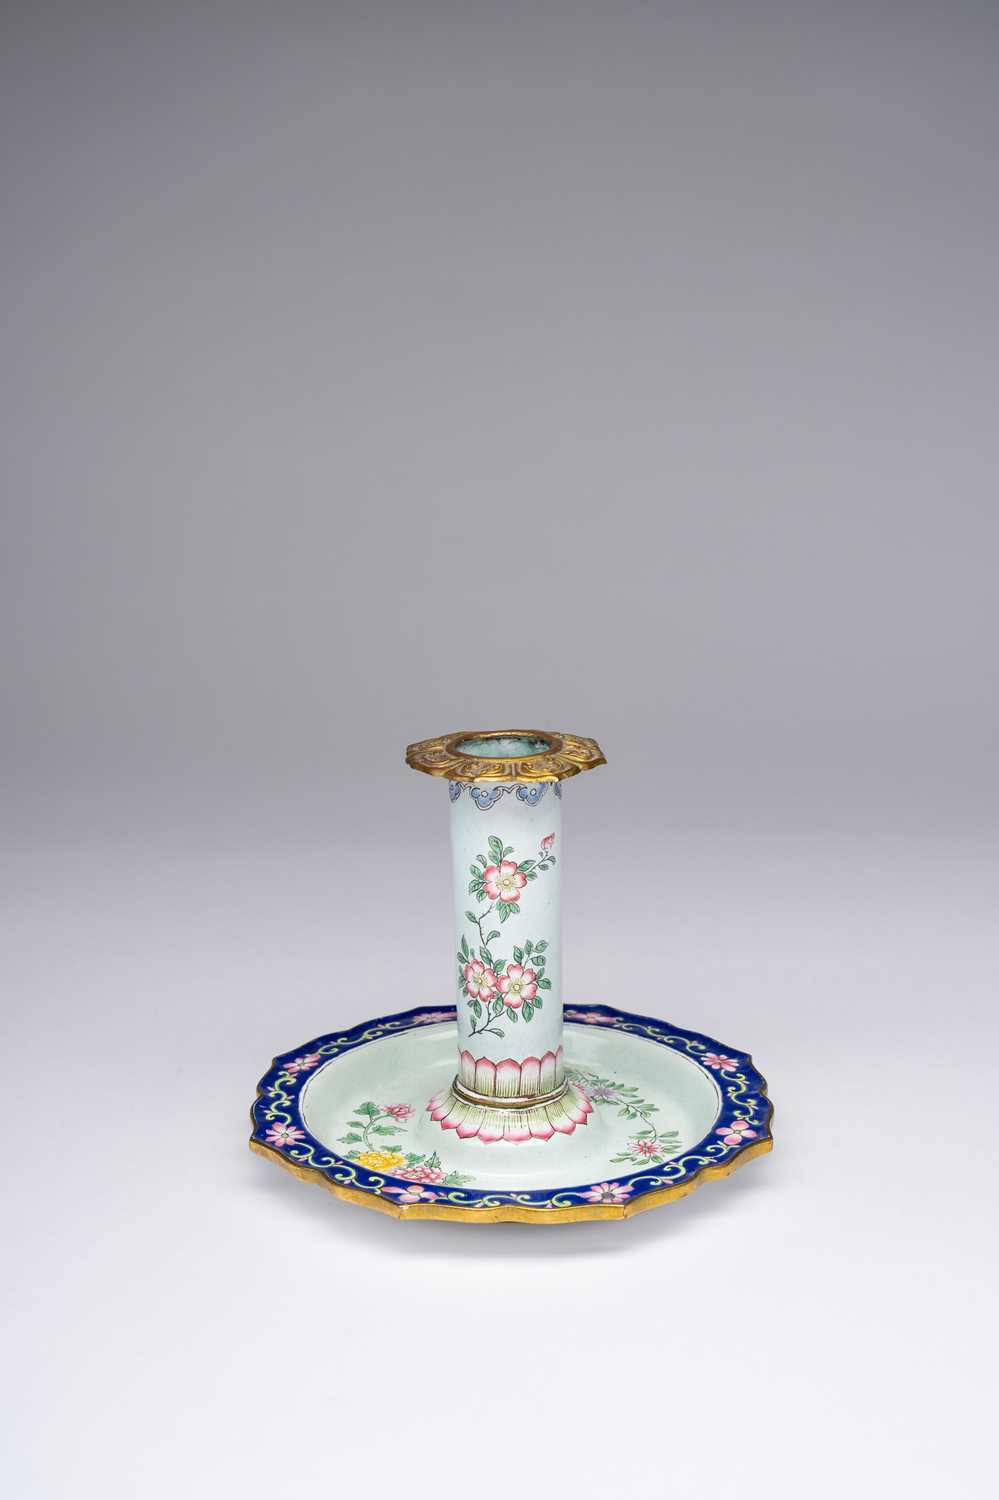 A CHINESE ENAMEL CHAMBER-STICK 18TH/19TH CENTURYFinely painted with flower sprays on a pale green